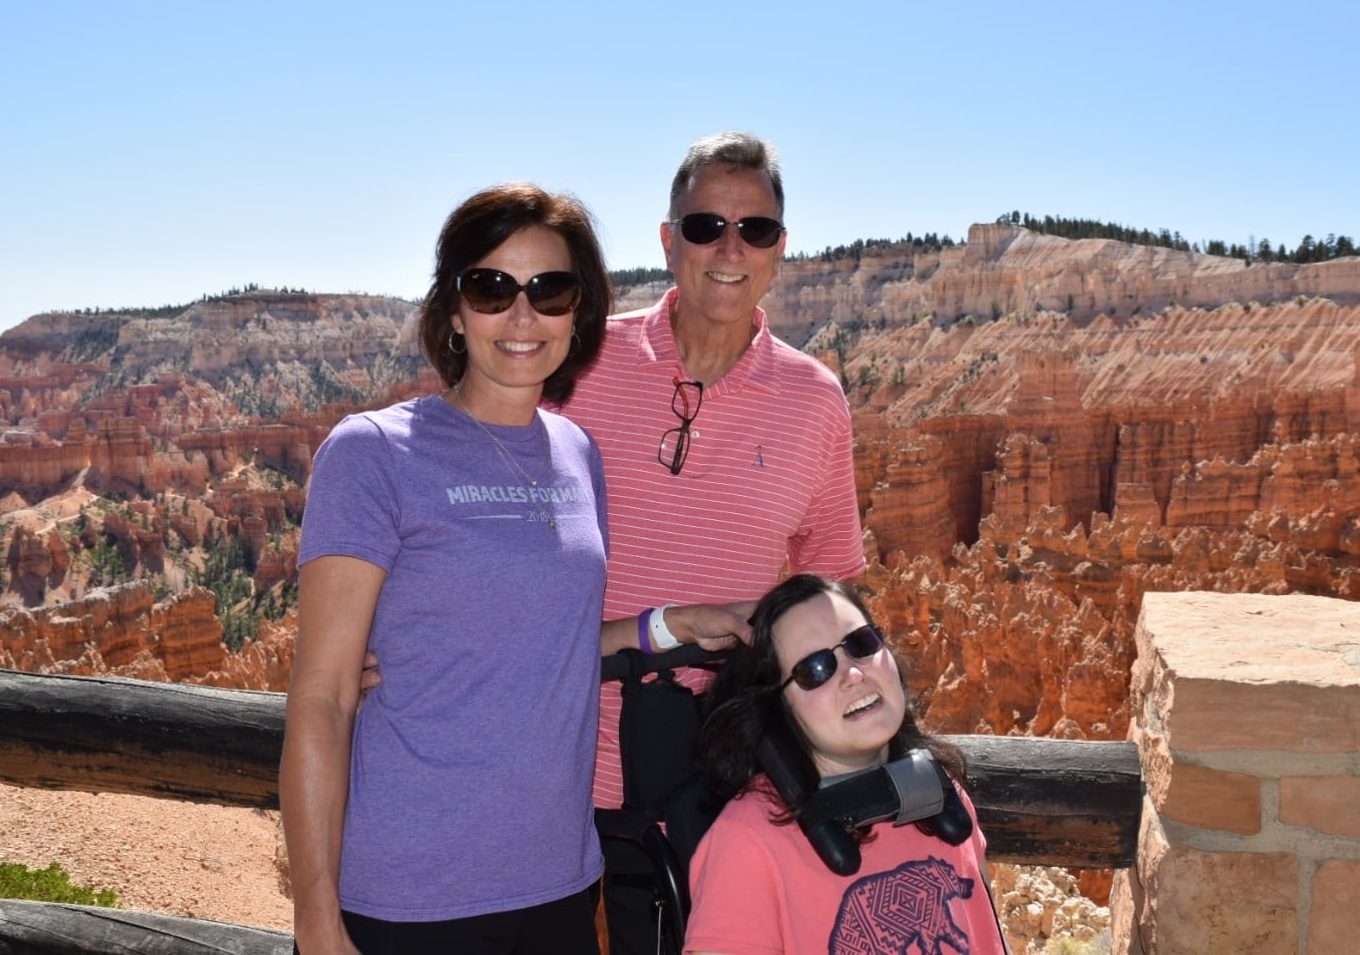 Jim, Patti and Mary Drake at the Grand Canyon during their 14-day road trip. (Photo courtesy of the Drakes)